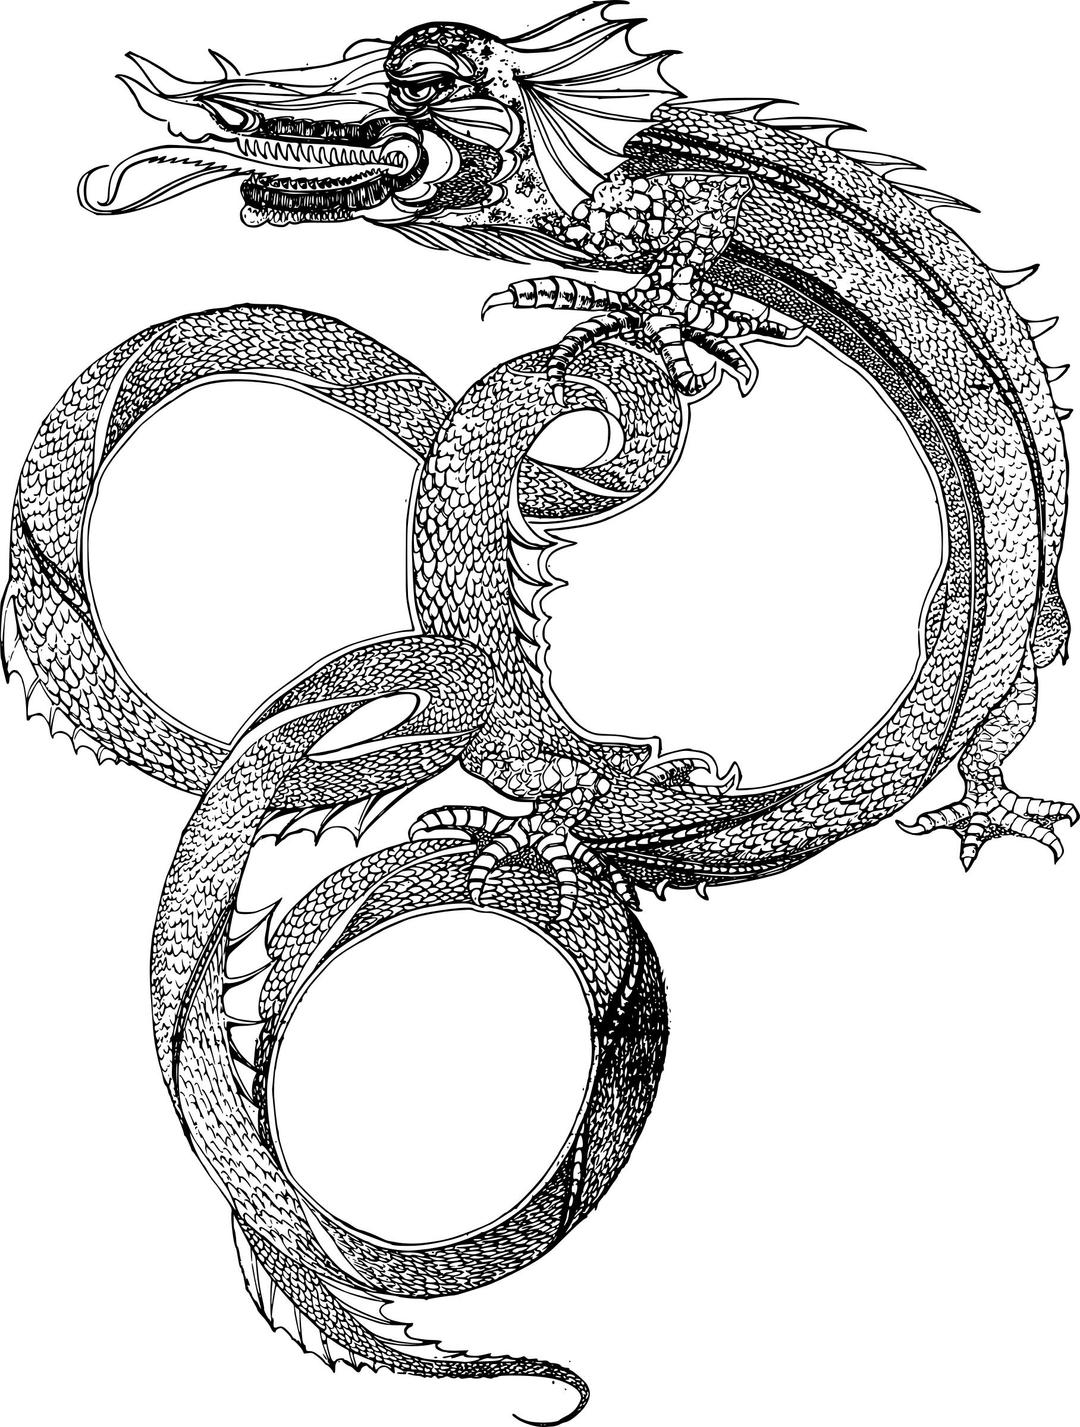 Loopy Asian Dragon Frame png transparent